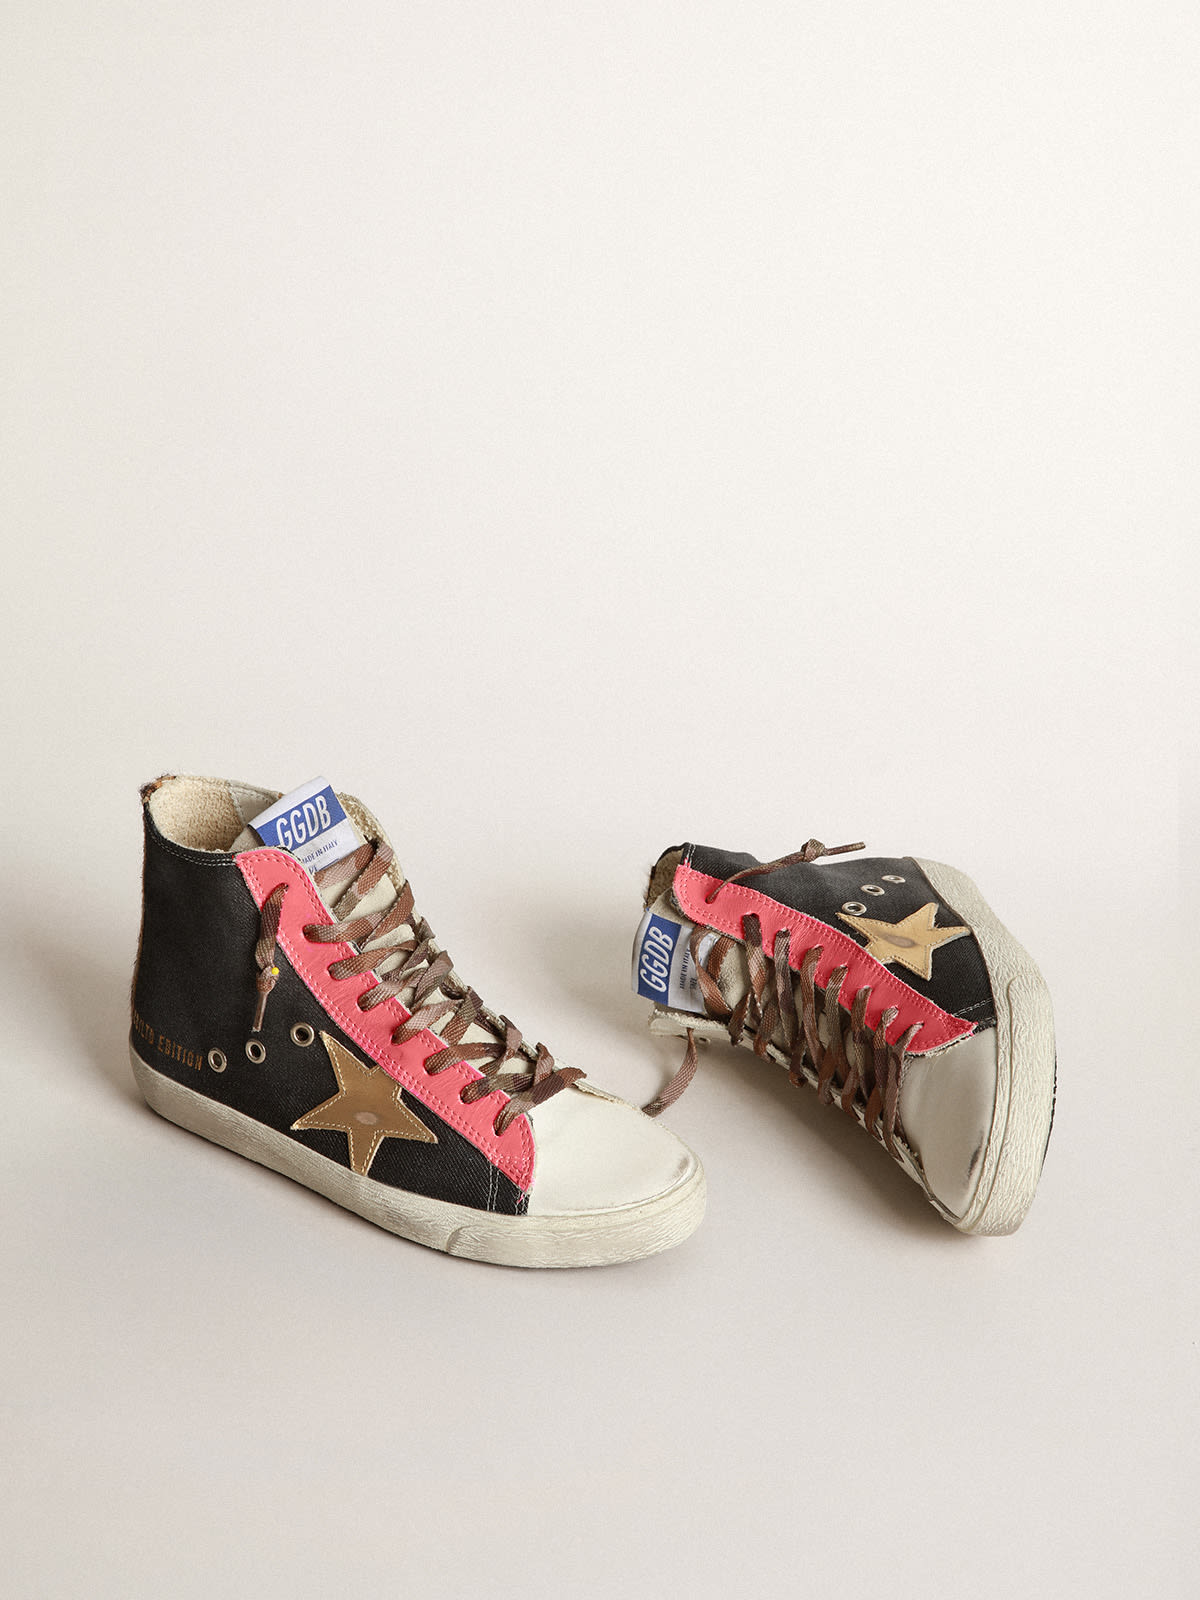 Golden Goose - Men’s Francy LTD sneakers in white leather and black denim with gold laminated leather star in 